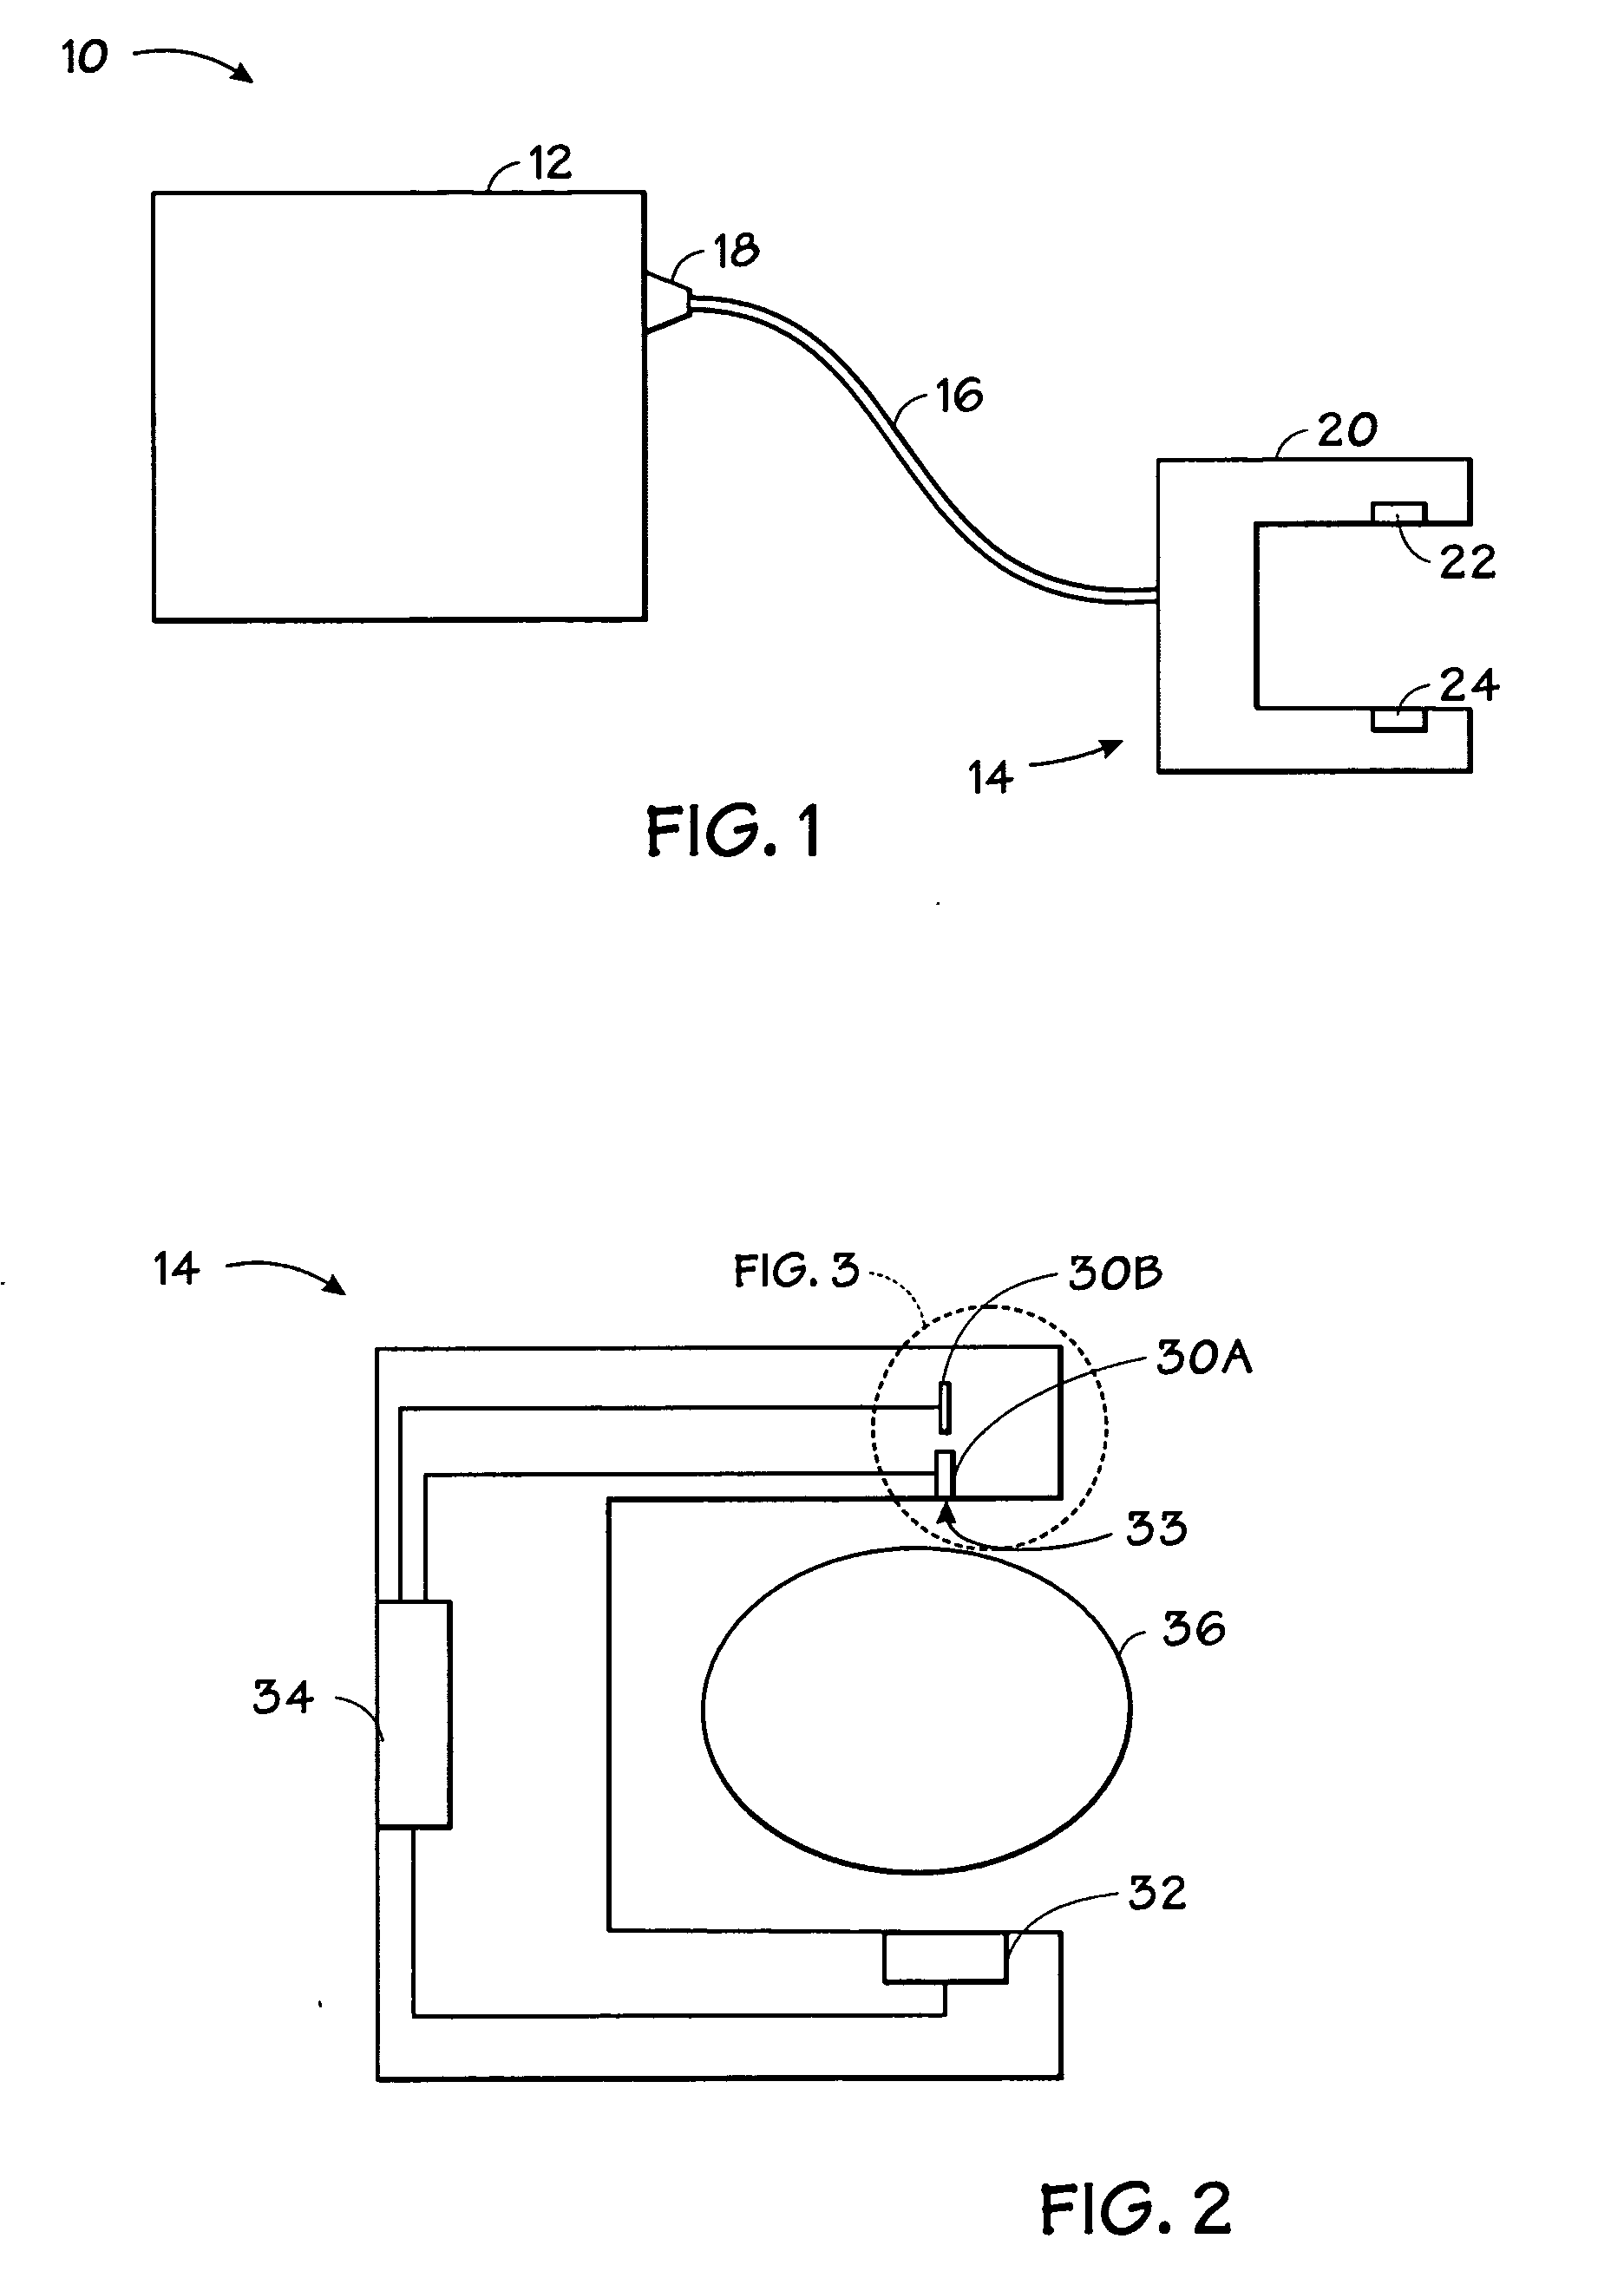 System and method for practicing spectrophotometry using light emitting nanostructure devices